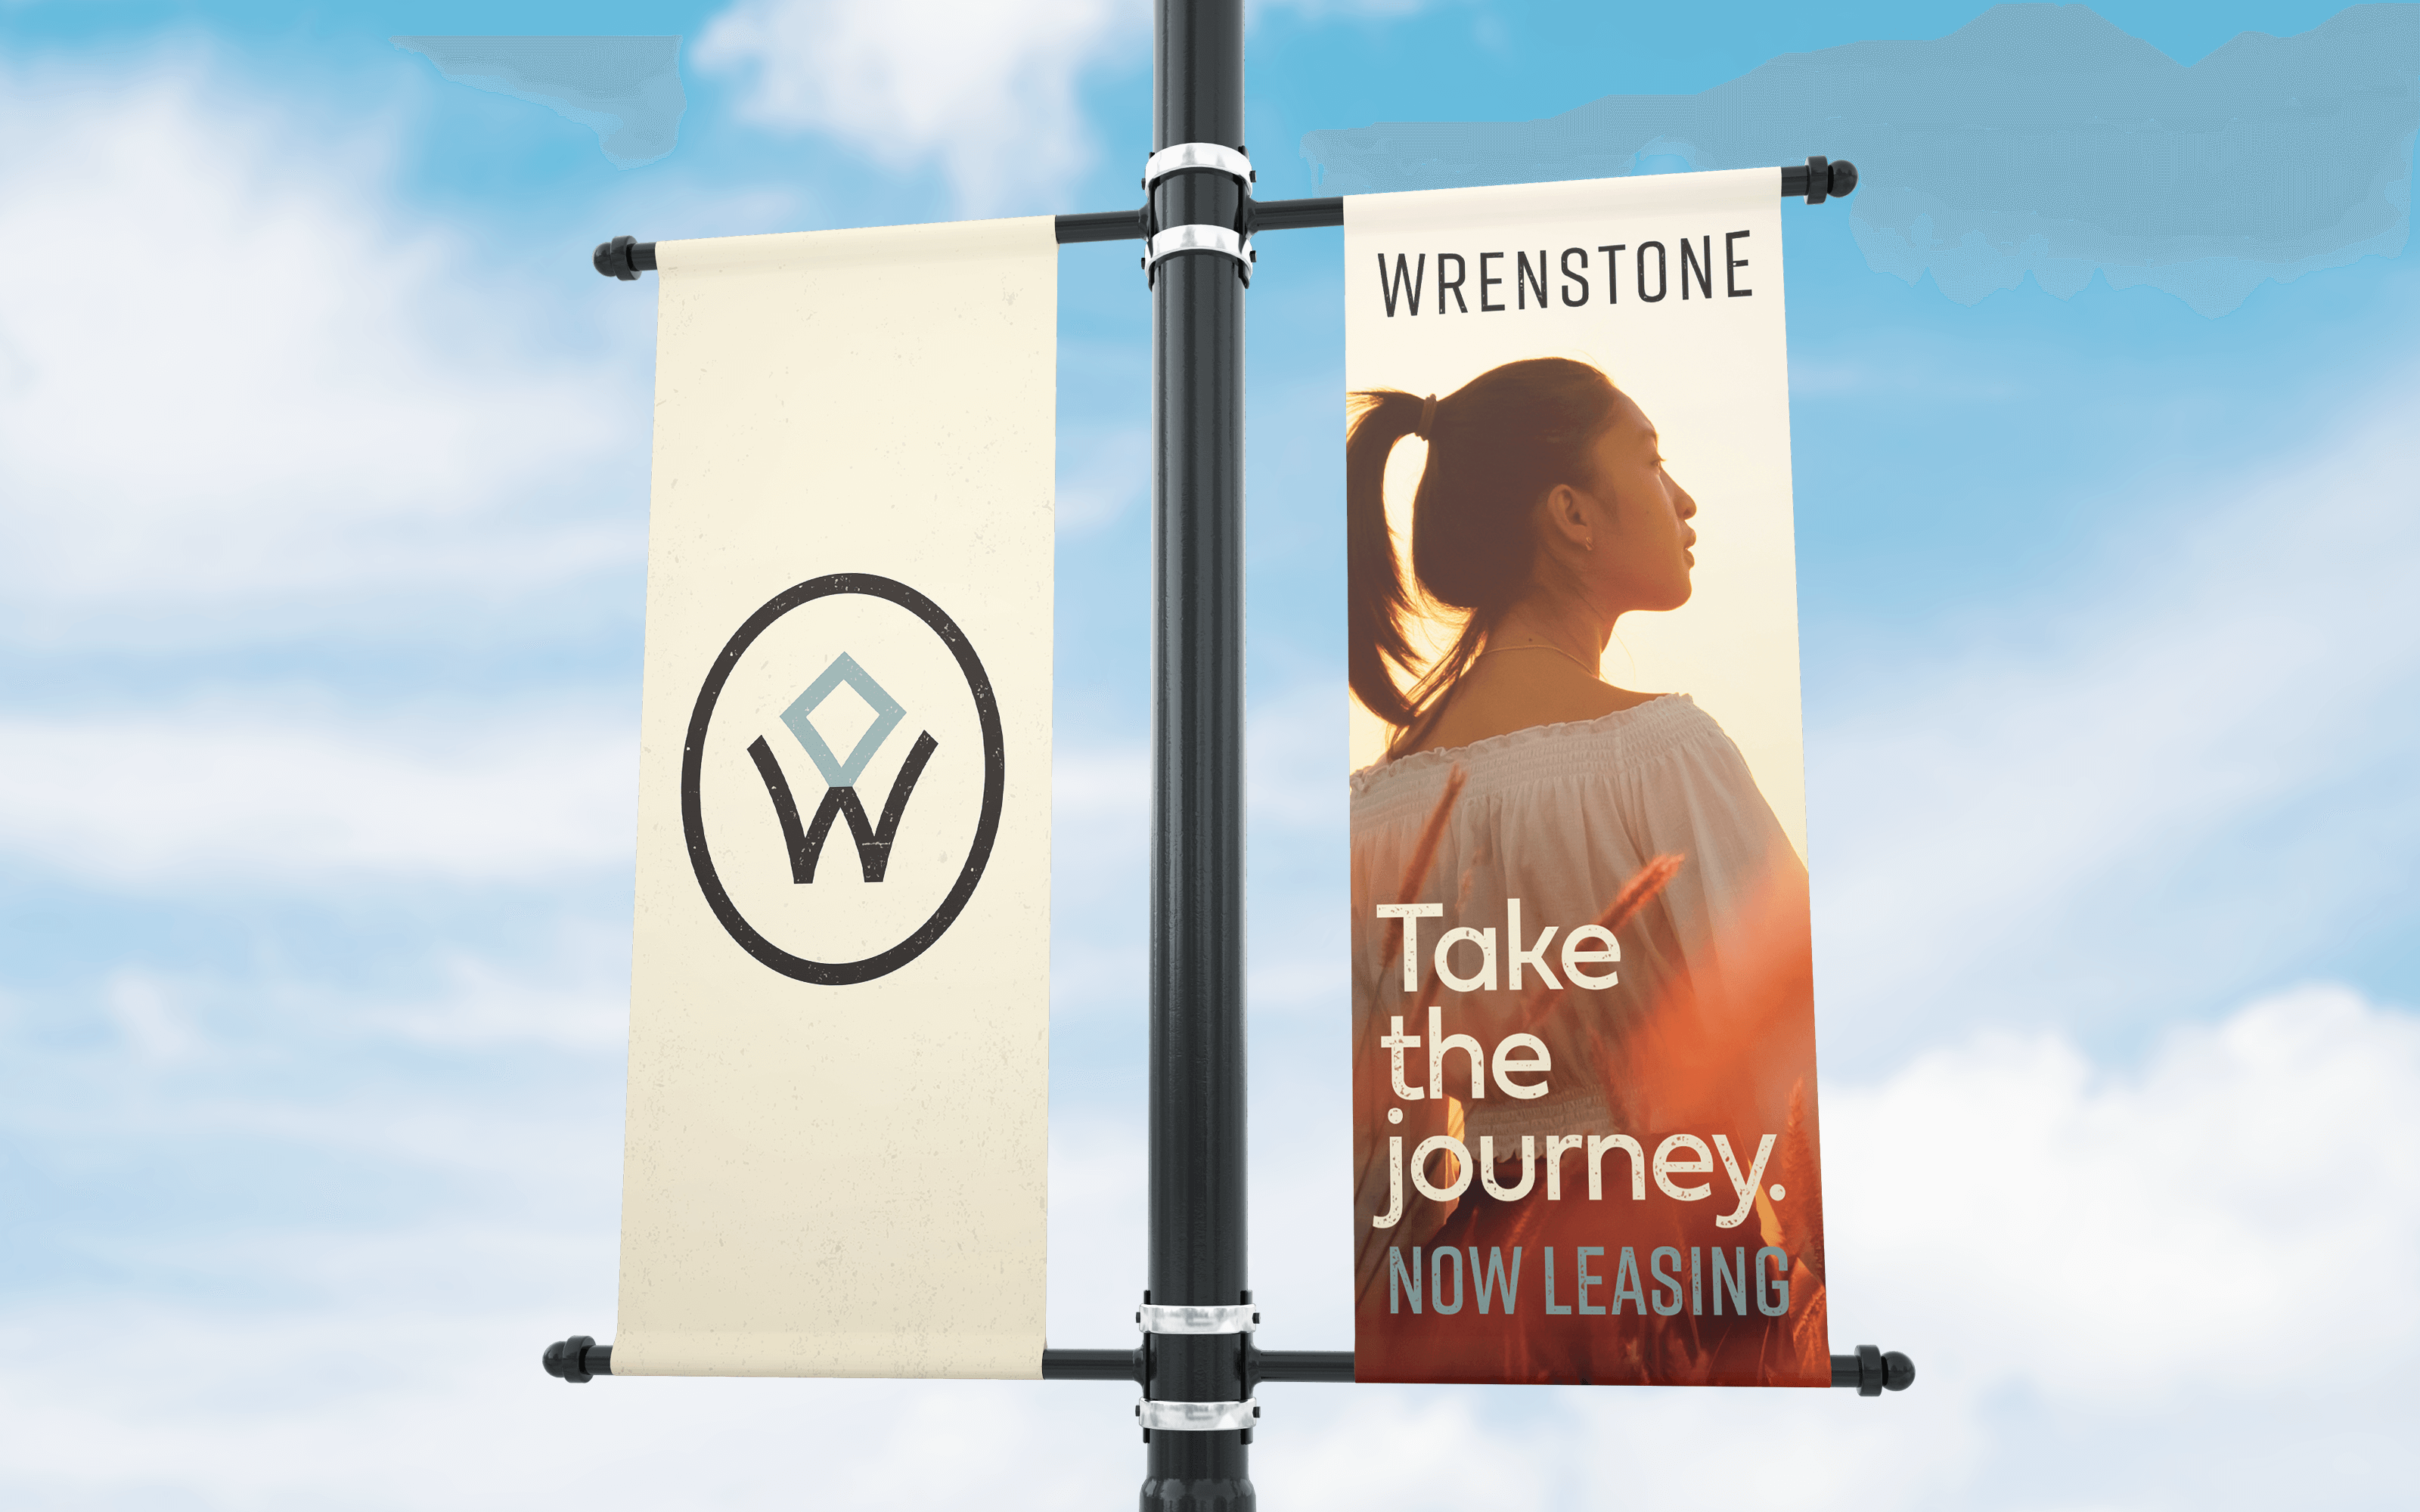 Wrenstone apartments exterior signage flag designs by ST8MNT